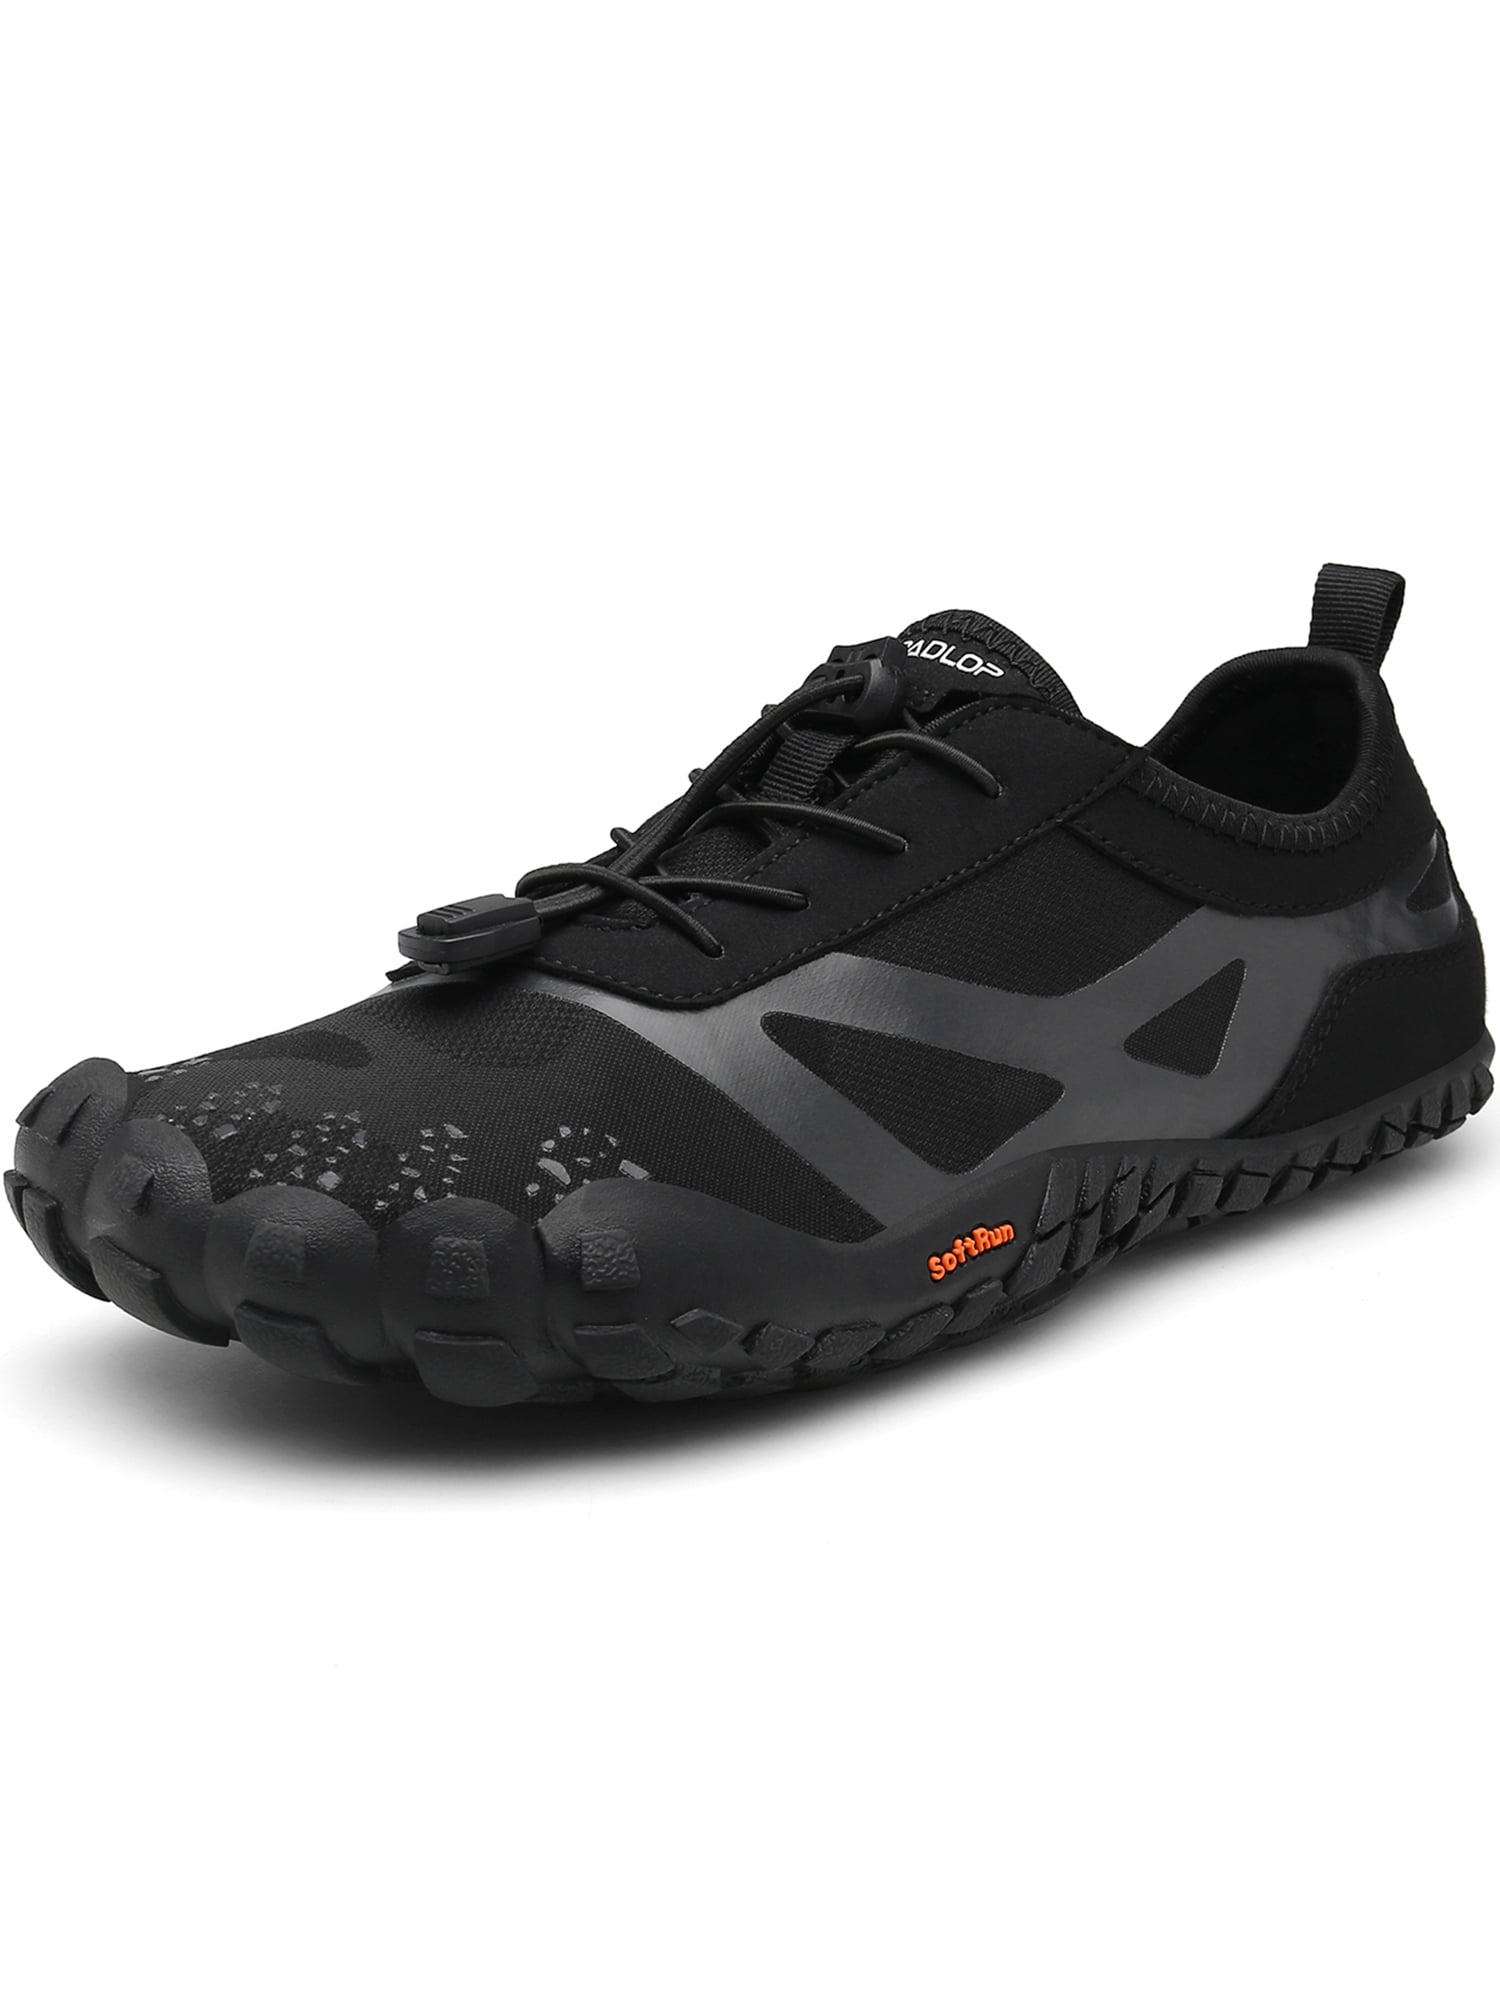 wide hiking shoes for men